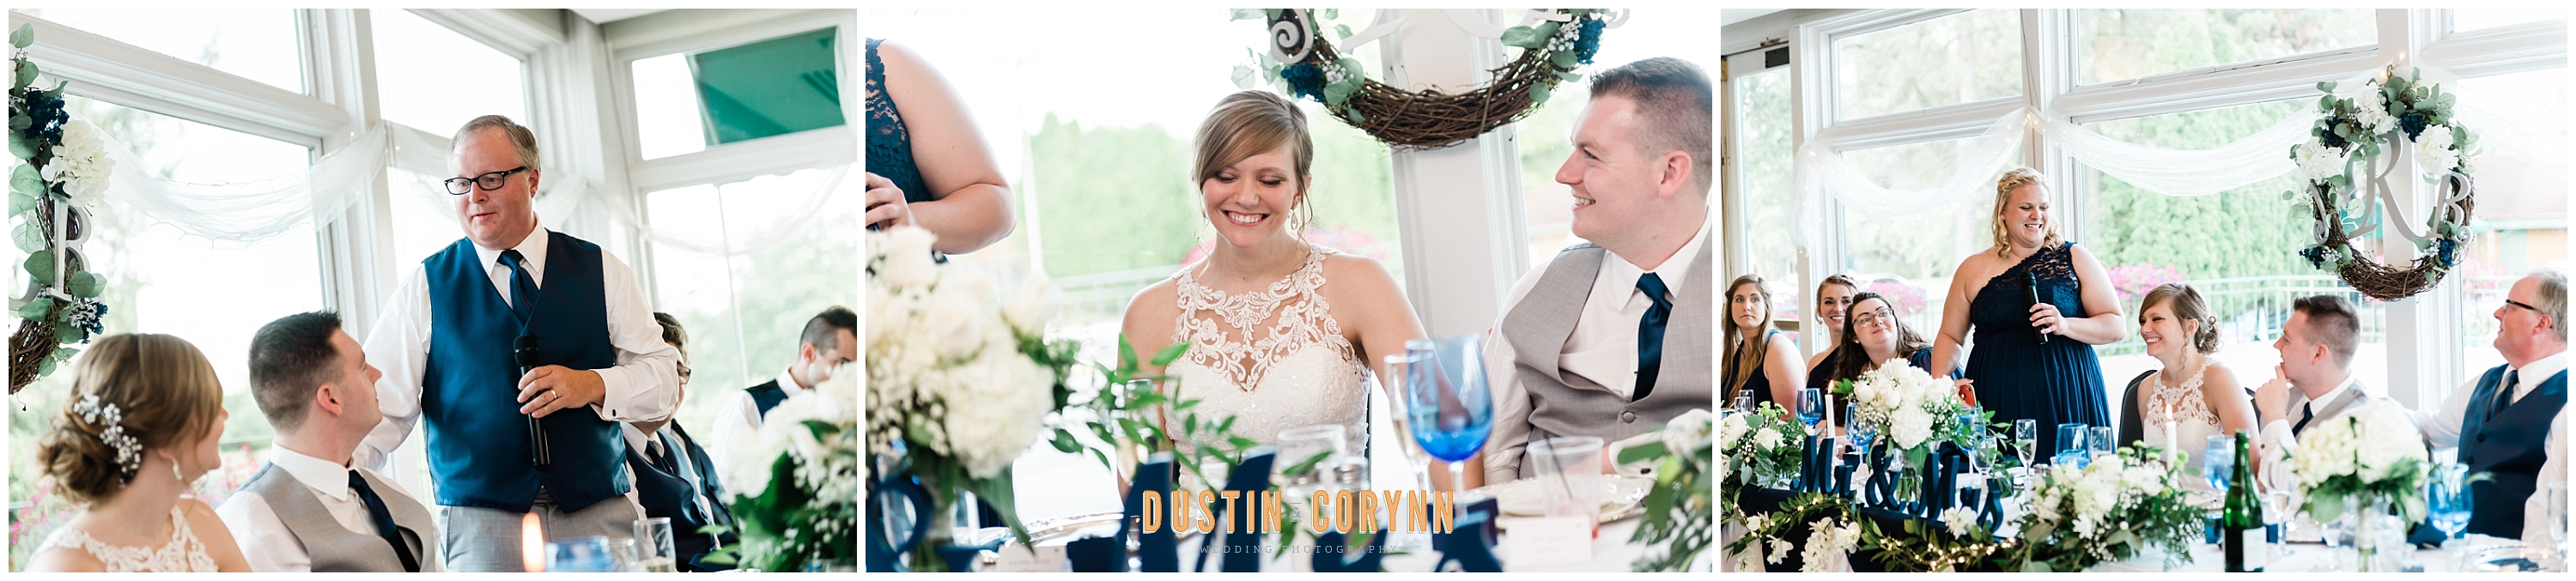 Toasts and Speeches at Orchard Ridge Country Club Wedding